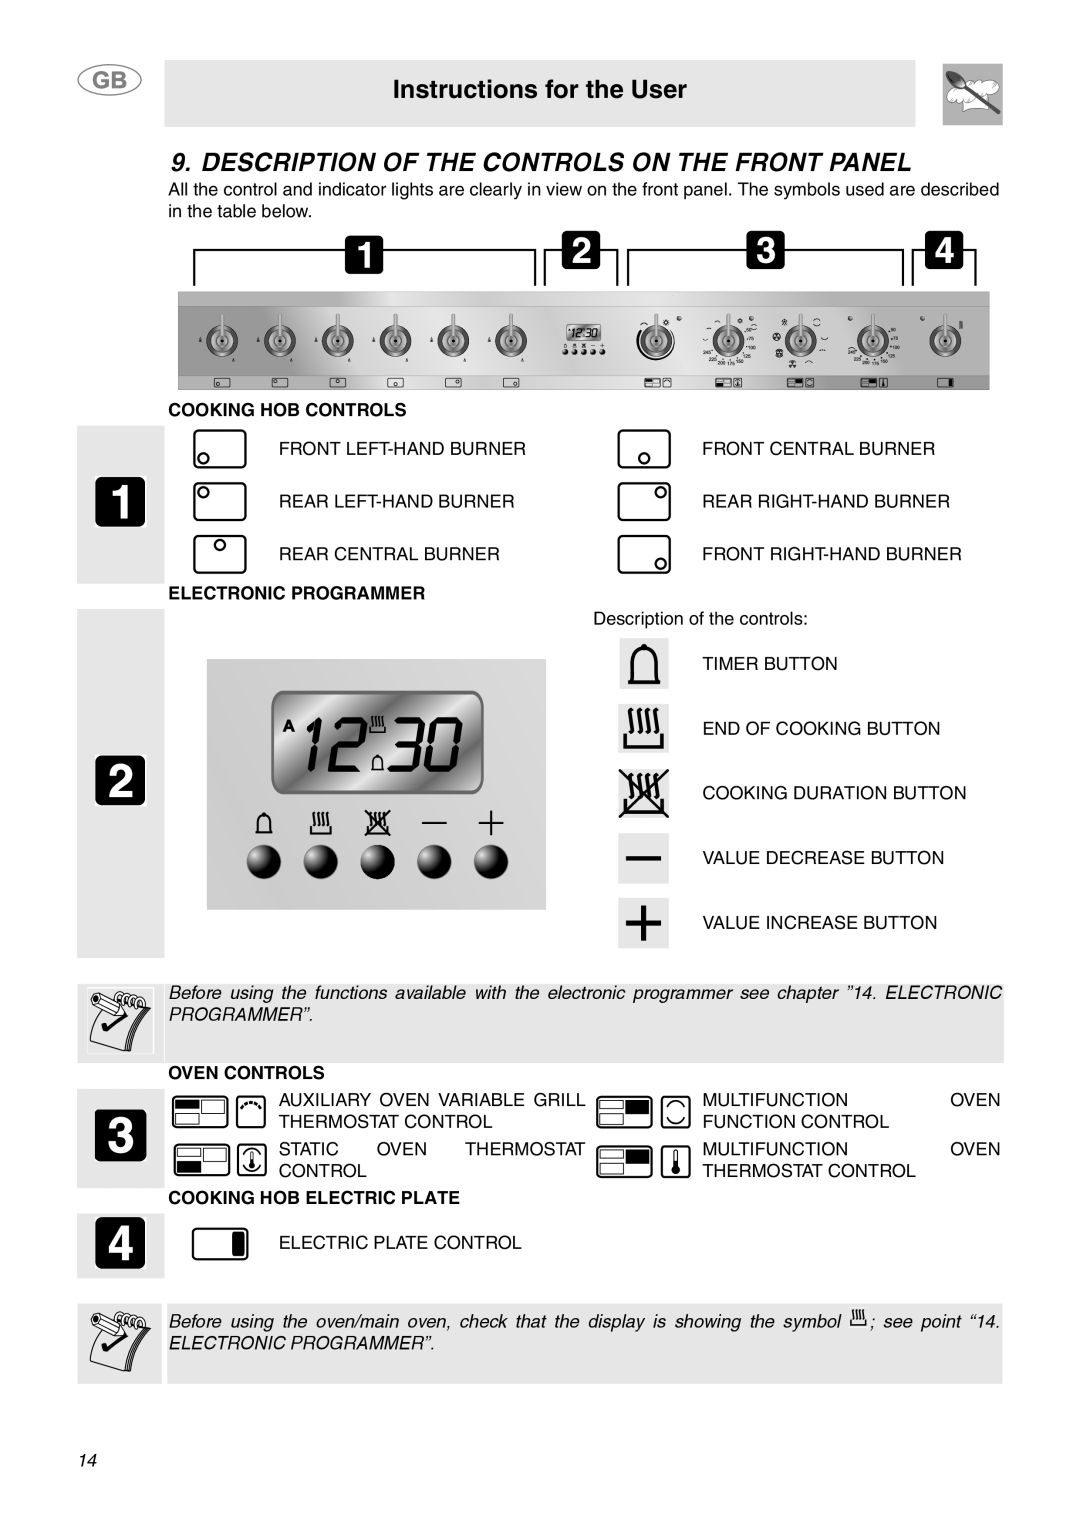 Smeg SY4110 Description Of The Controls On The Front Panel, Instructions for the User, Cooking Hob Controls, Oven Controls 